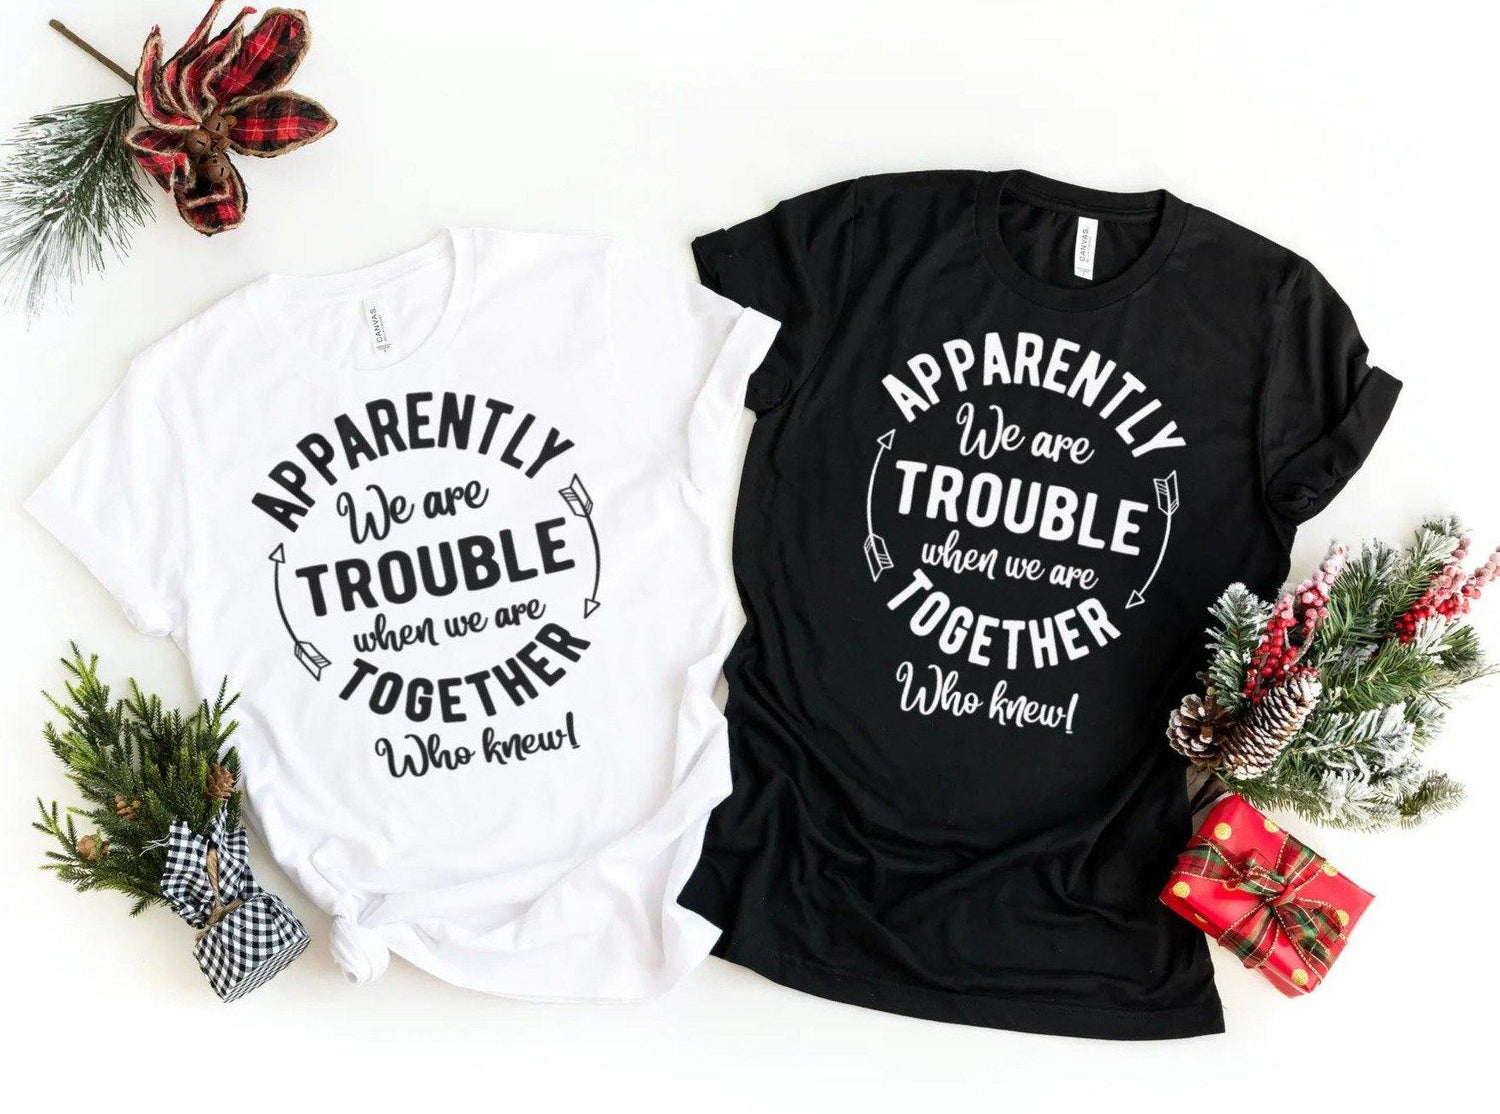 Apparently We are Trouble Together - T-Shirt - Healthy Wealthy Skinny